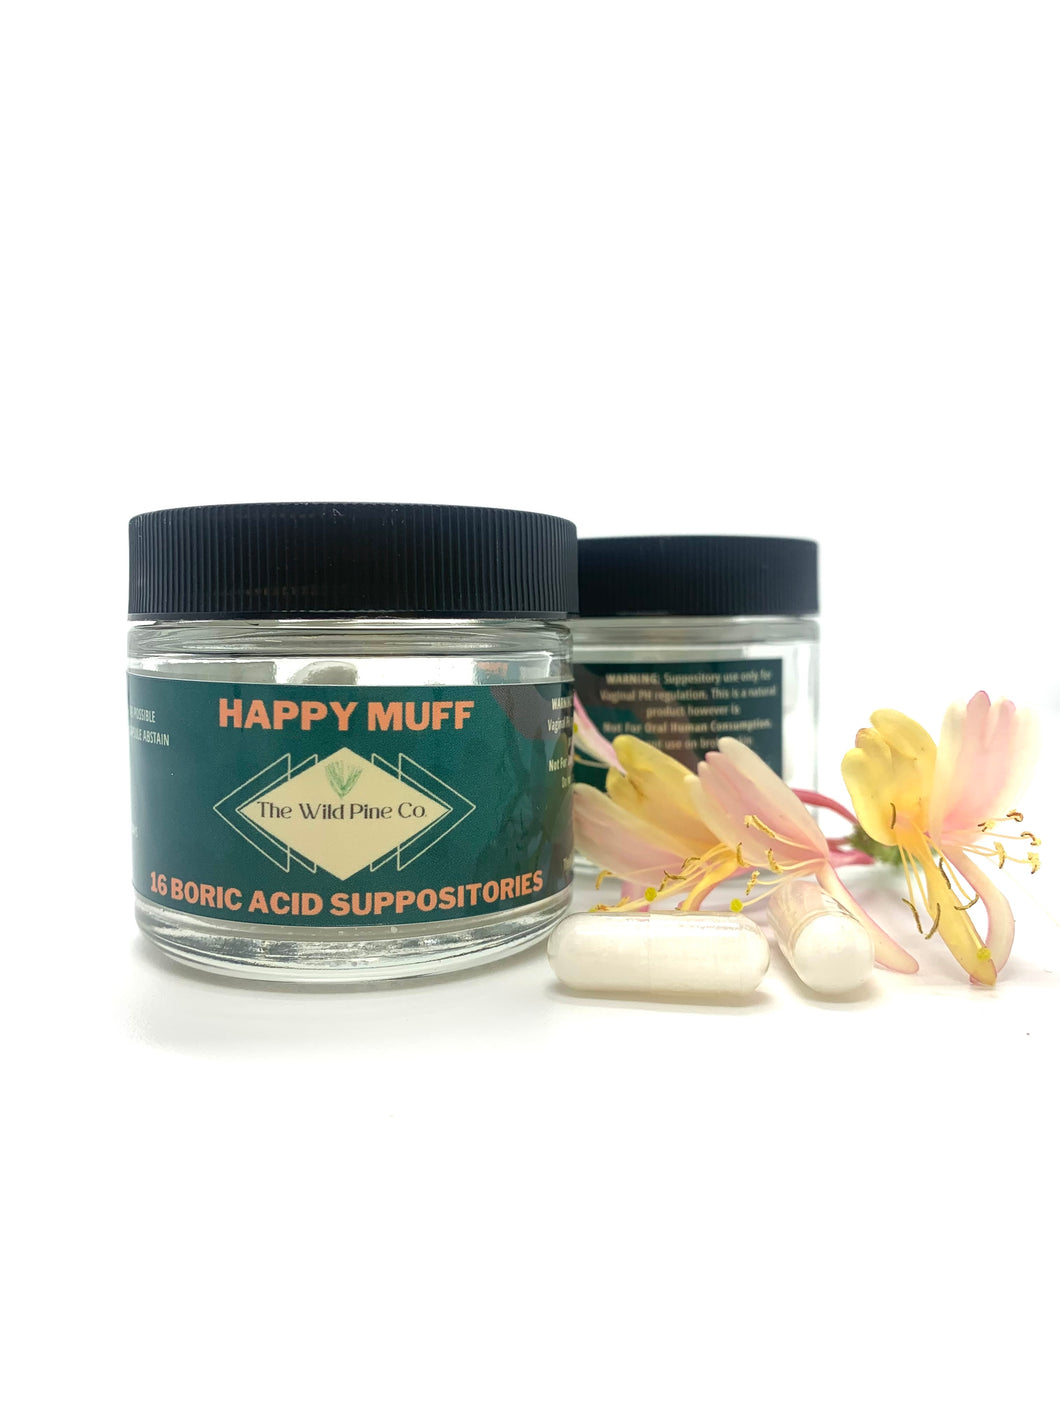 Happy Muff - PH balancing natural boric acid suppositories for women